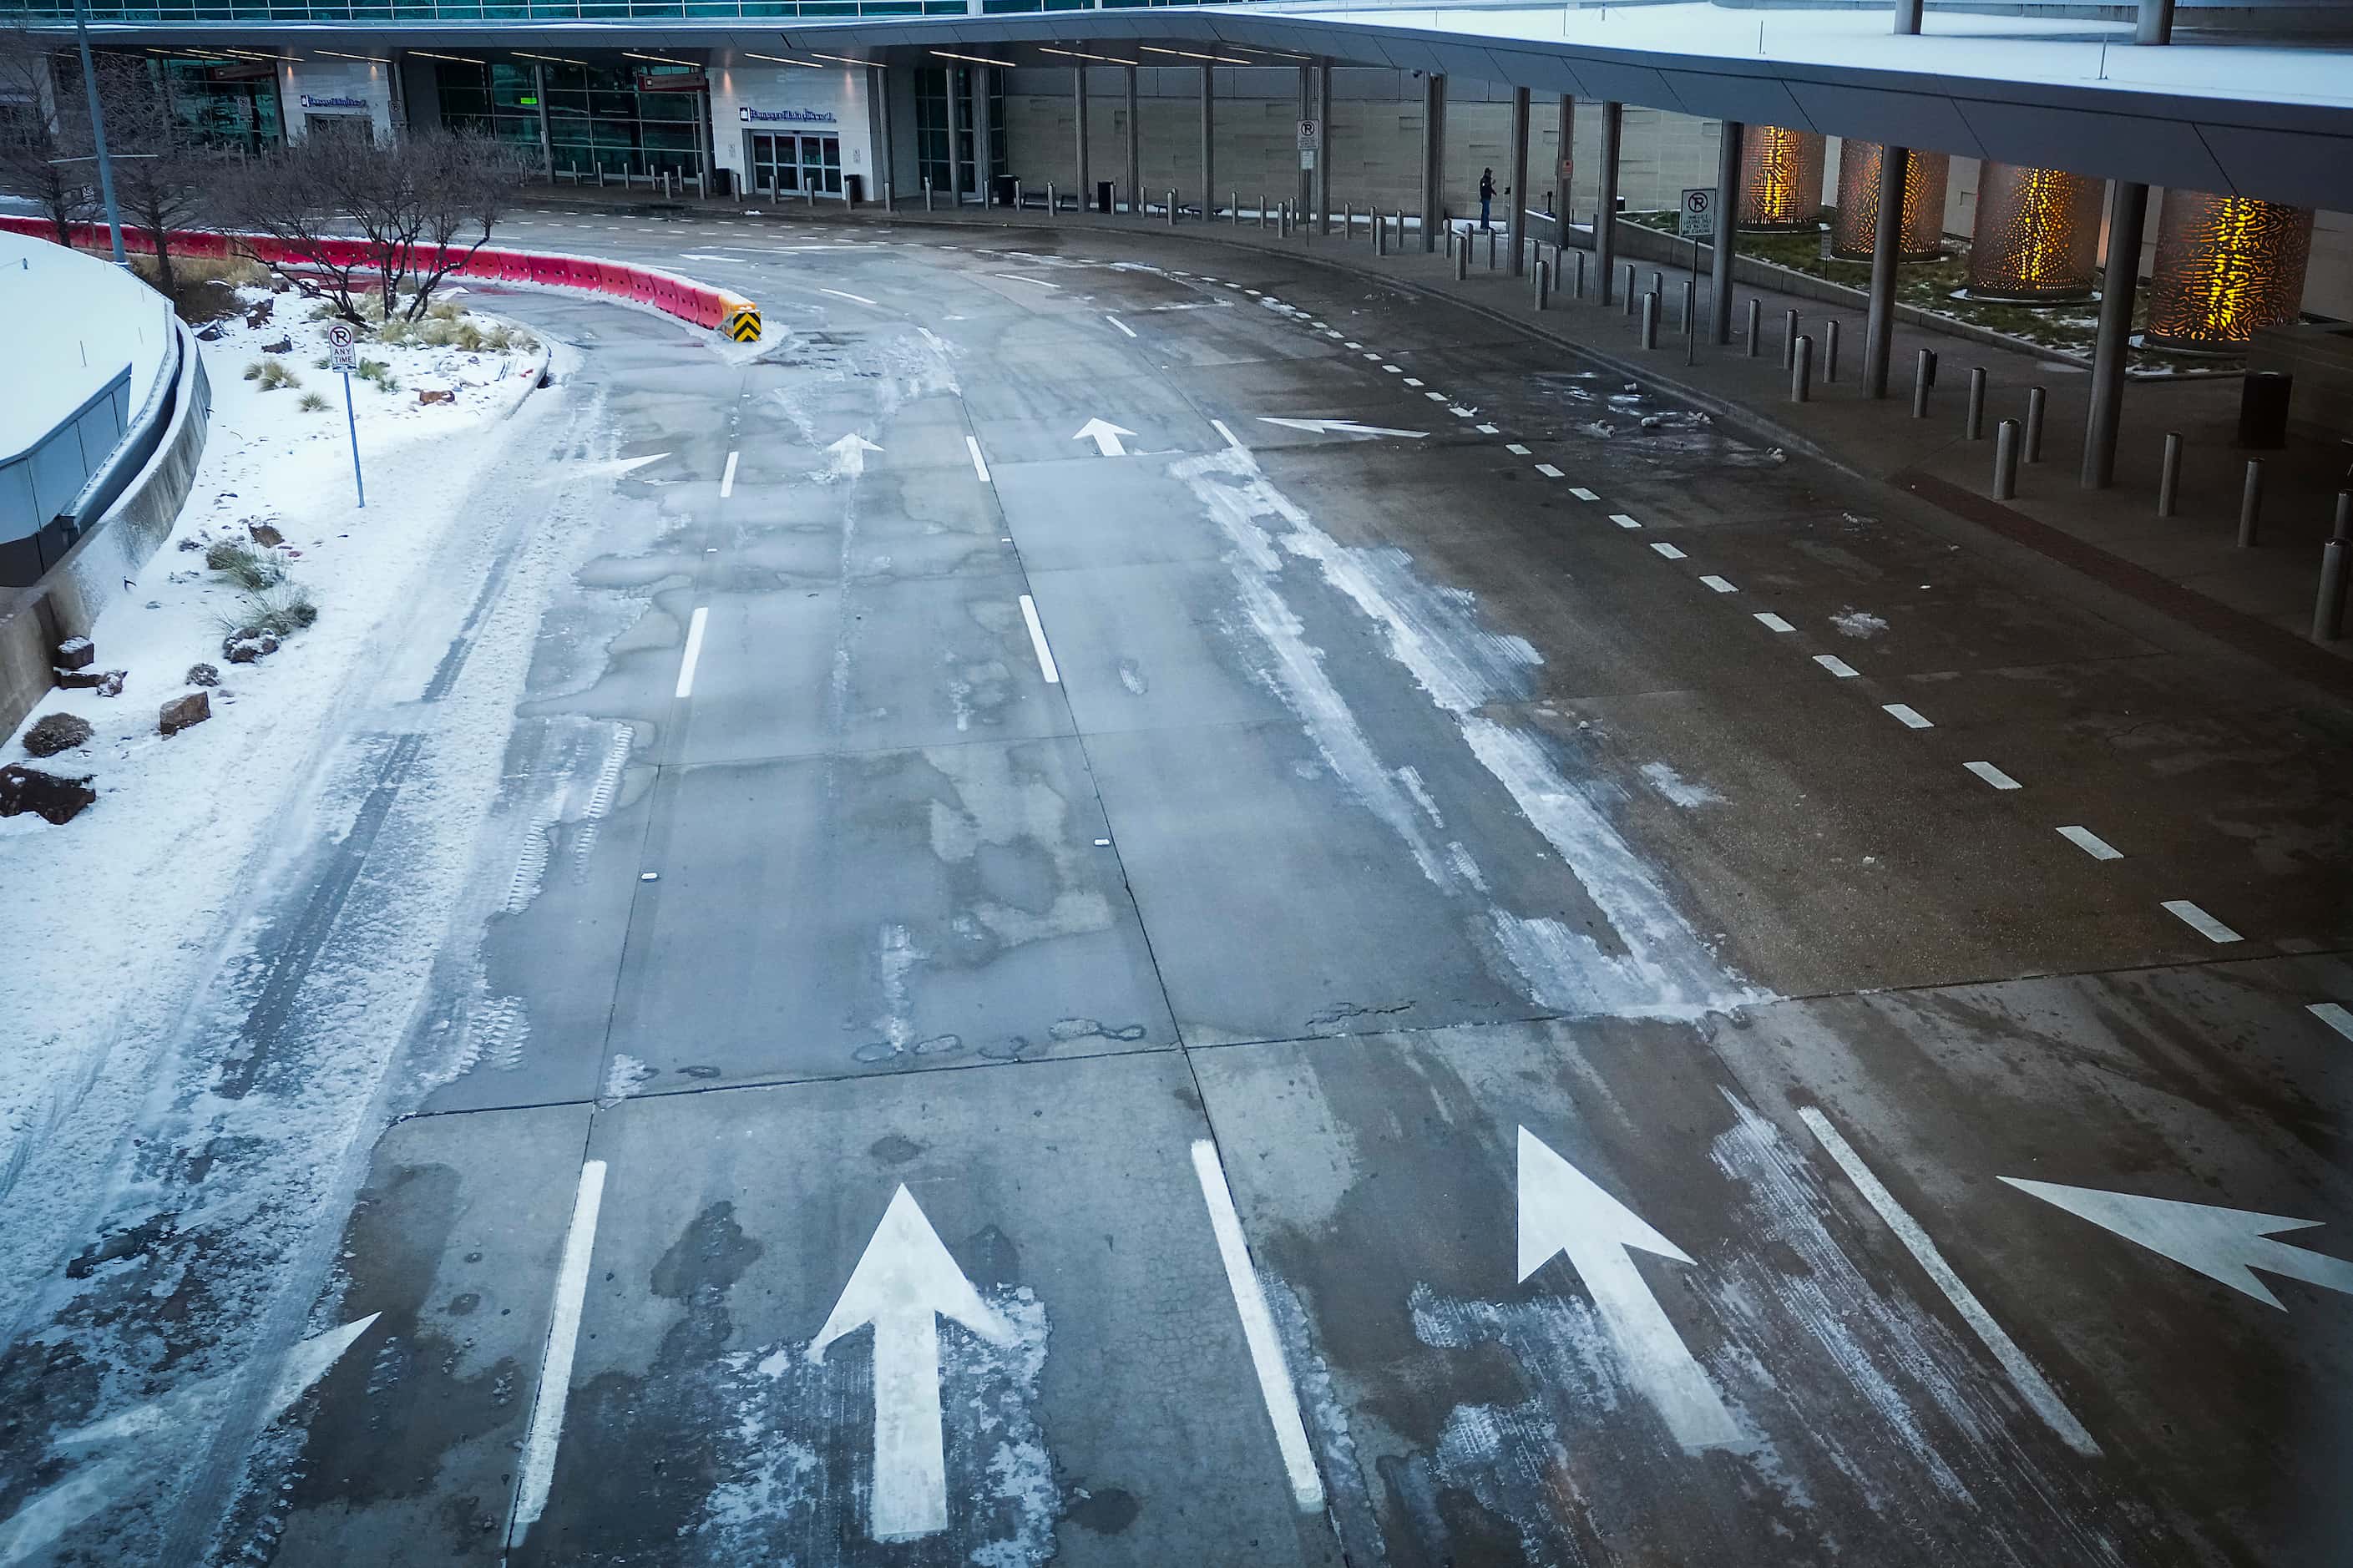 The arrivals curbside at Dallas Love field sits empty after a winter storm moved through...